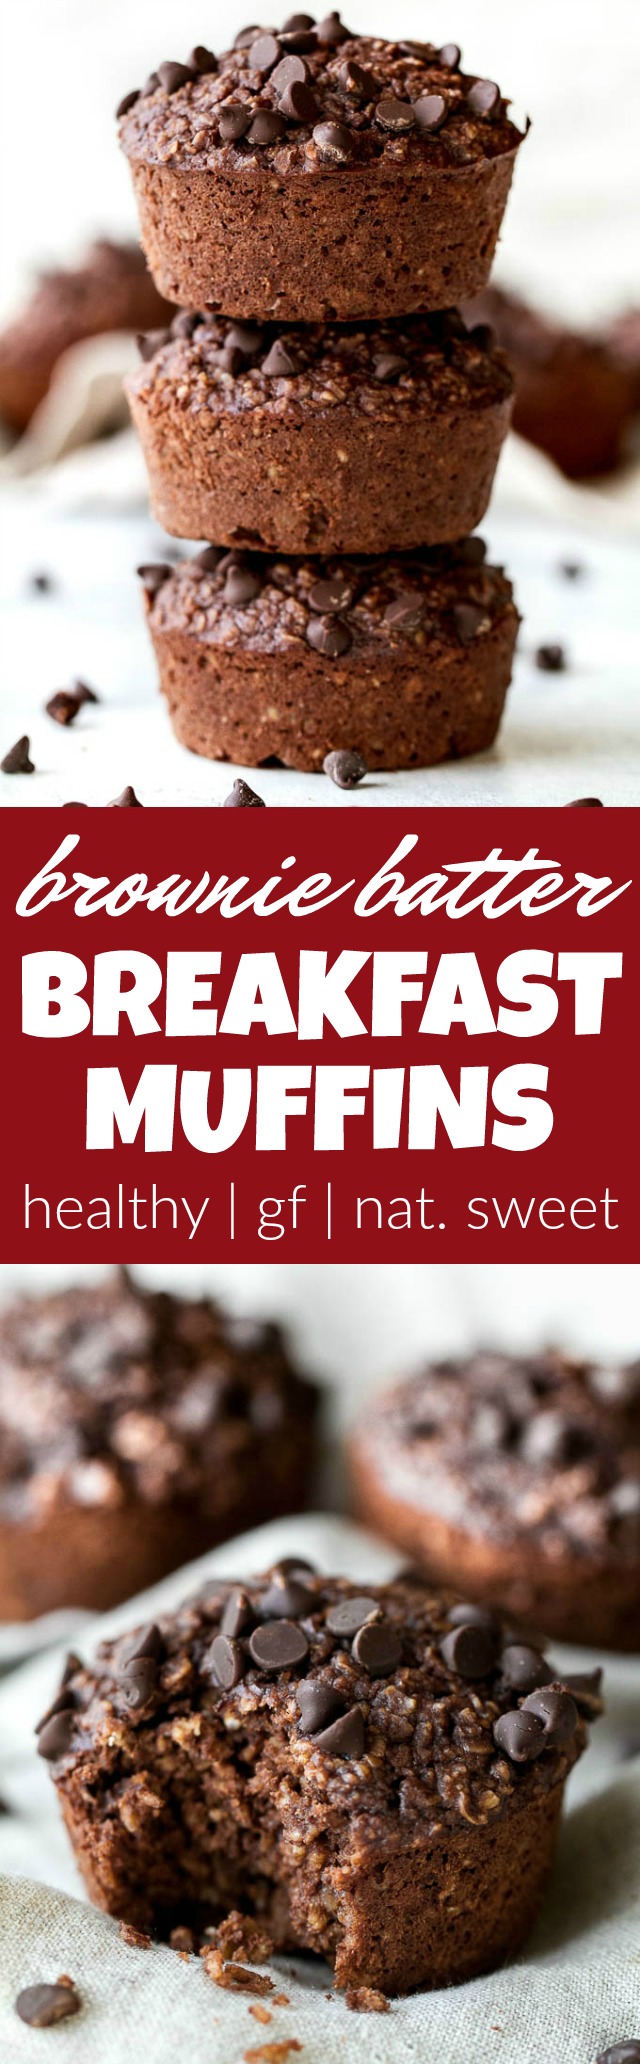 Brownie Batter Breakfast Muffins that are naturally sweetened and loaded with chocolate flavour! They're a deliciously healthy way to start your day or pull out whenever you need a satisfying snack | runningwithspoons.com